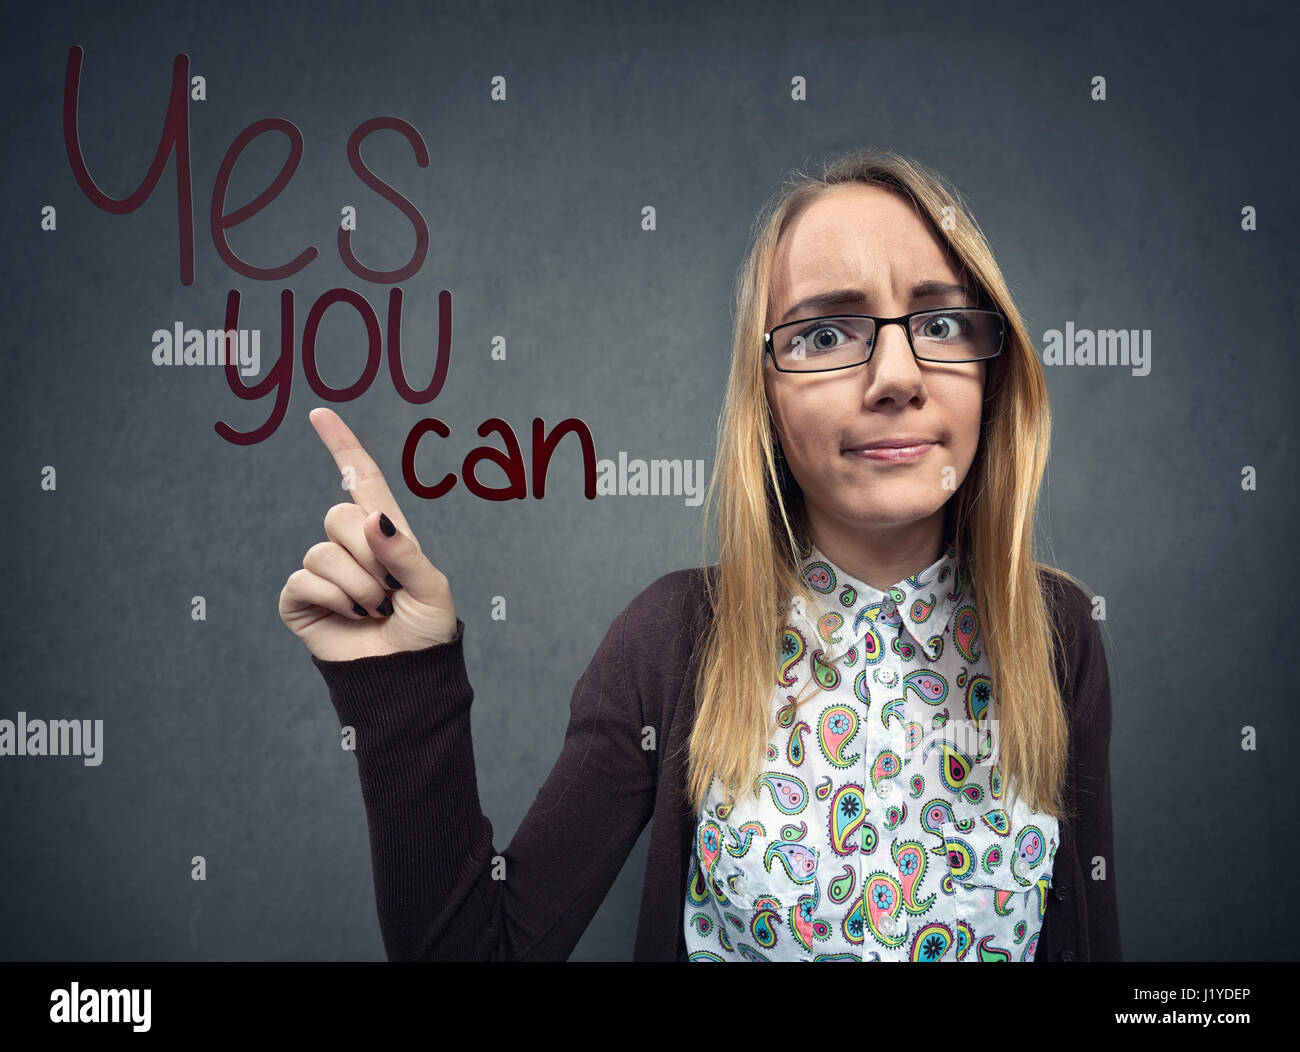 Schoolgirl nerd pointing at a Yes you can sign Stock Photo